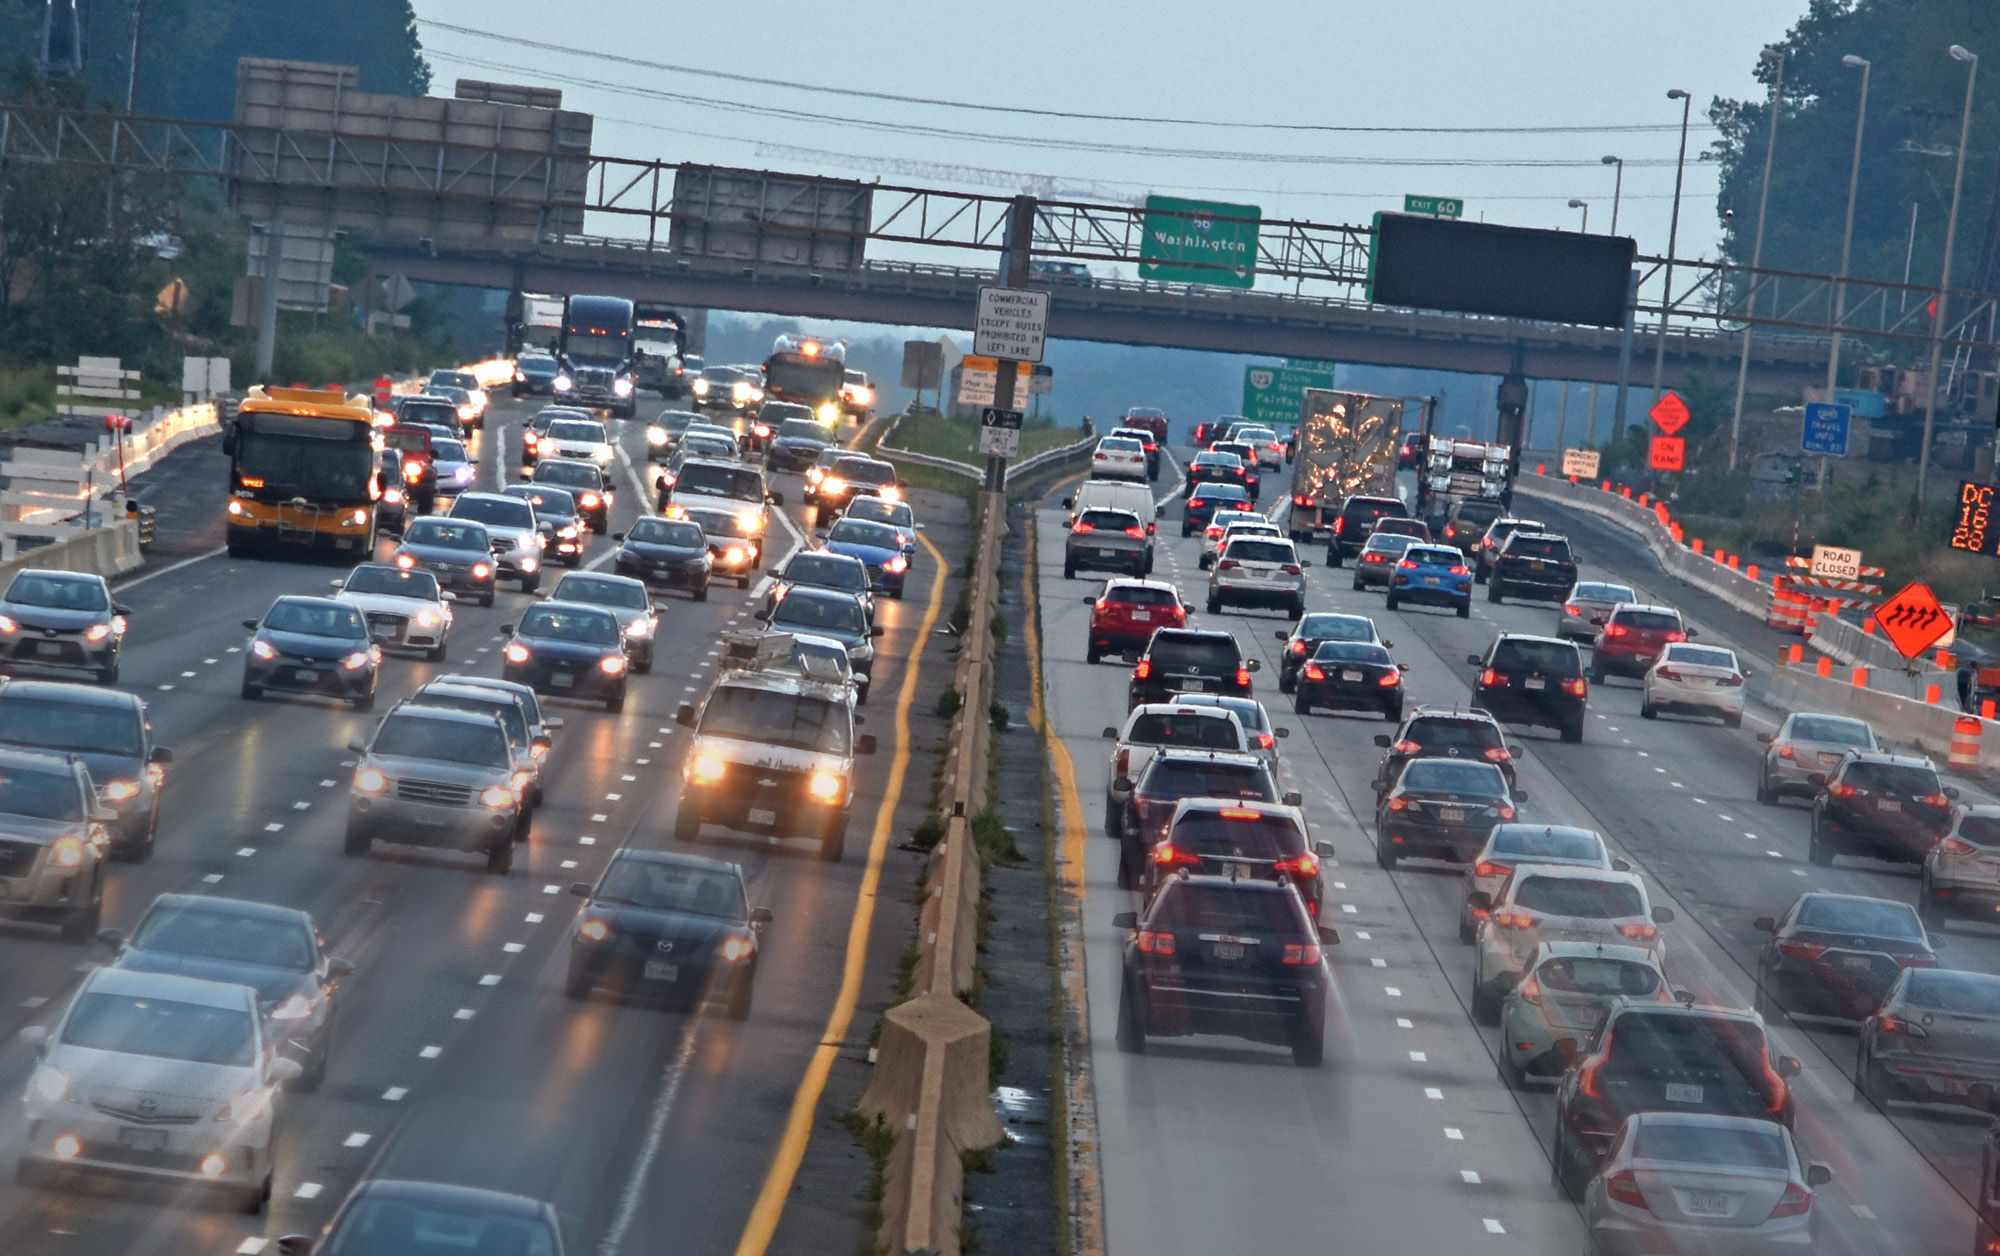 Maryland auto insurance among highest; Virginia top for aggressive drivers